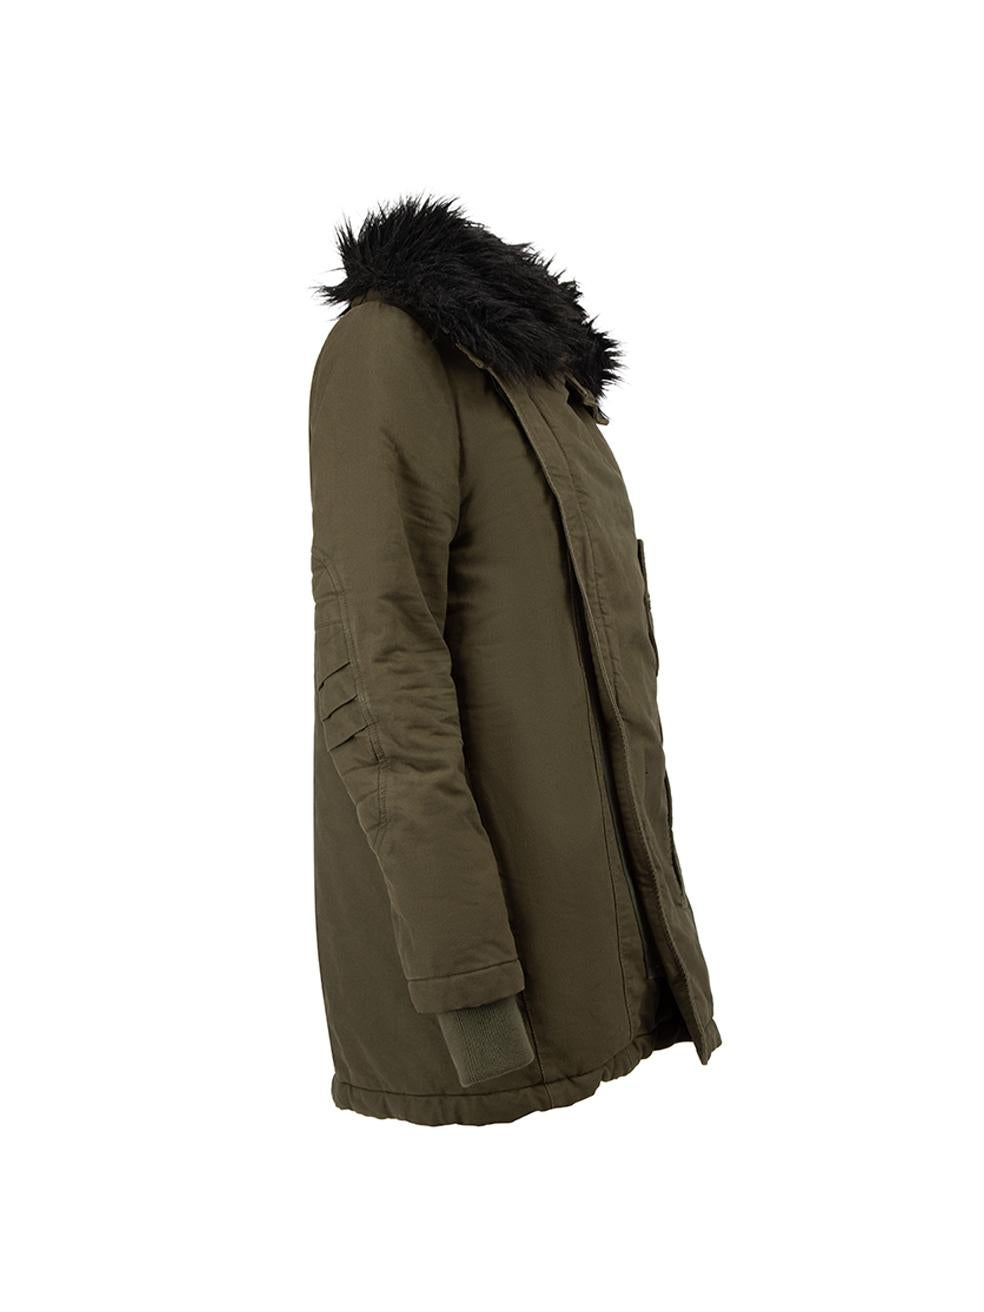 CONDITION is Very good. Minimal wear to jacket is evident. Minimal wear to the faux fur collar which is starting to matt up a little bit. There is also wear to the interior lining where stains can be seen near the bottoms and side of the jacket. The